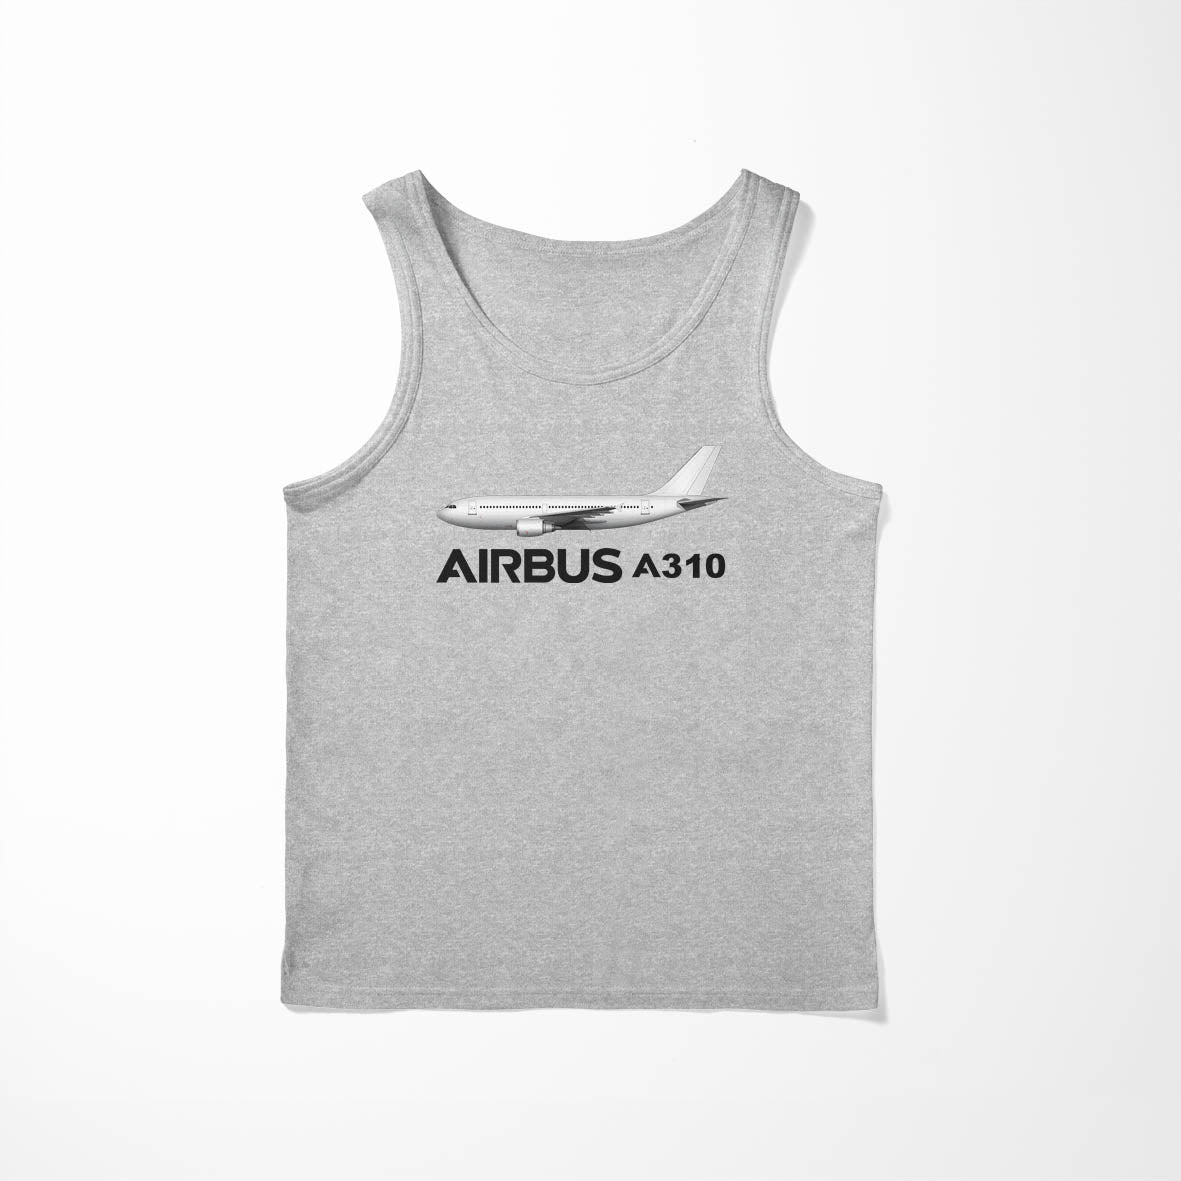 The Airbus A310 Designed Tank Tops